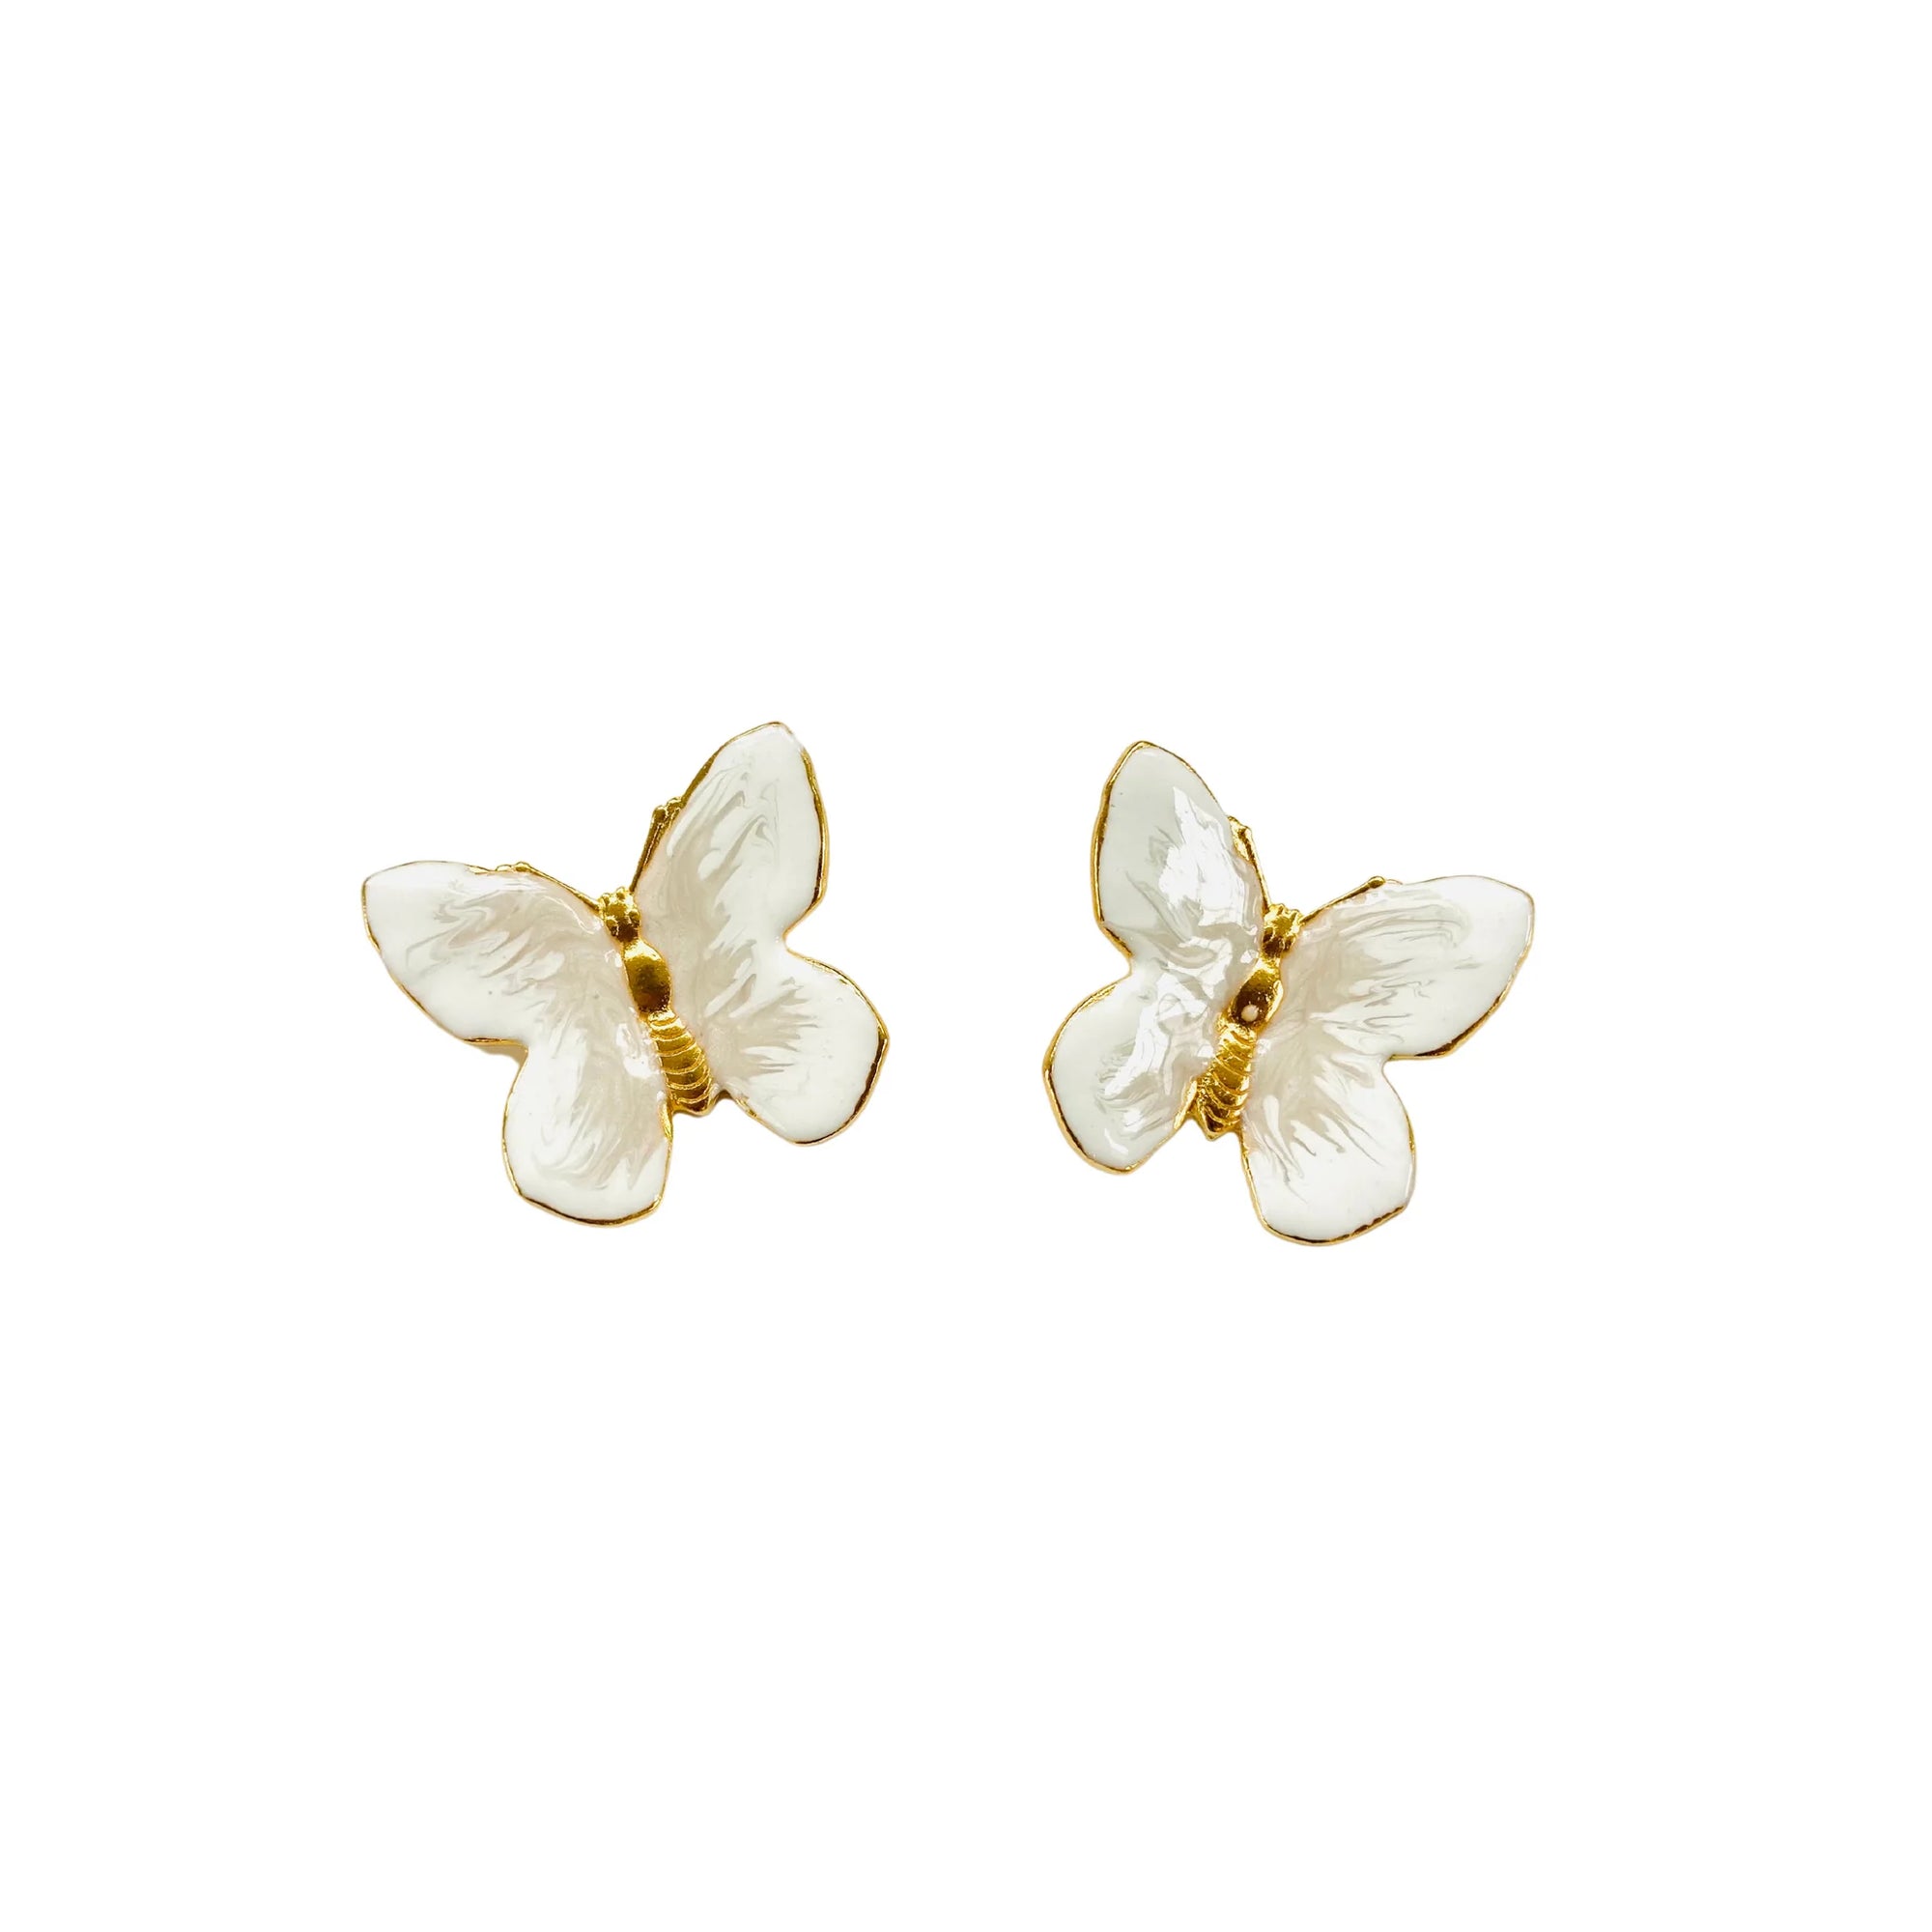 The Pink Reef Small Glassine Butterfly Earring